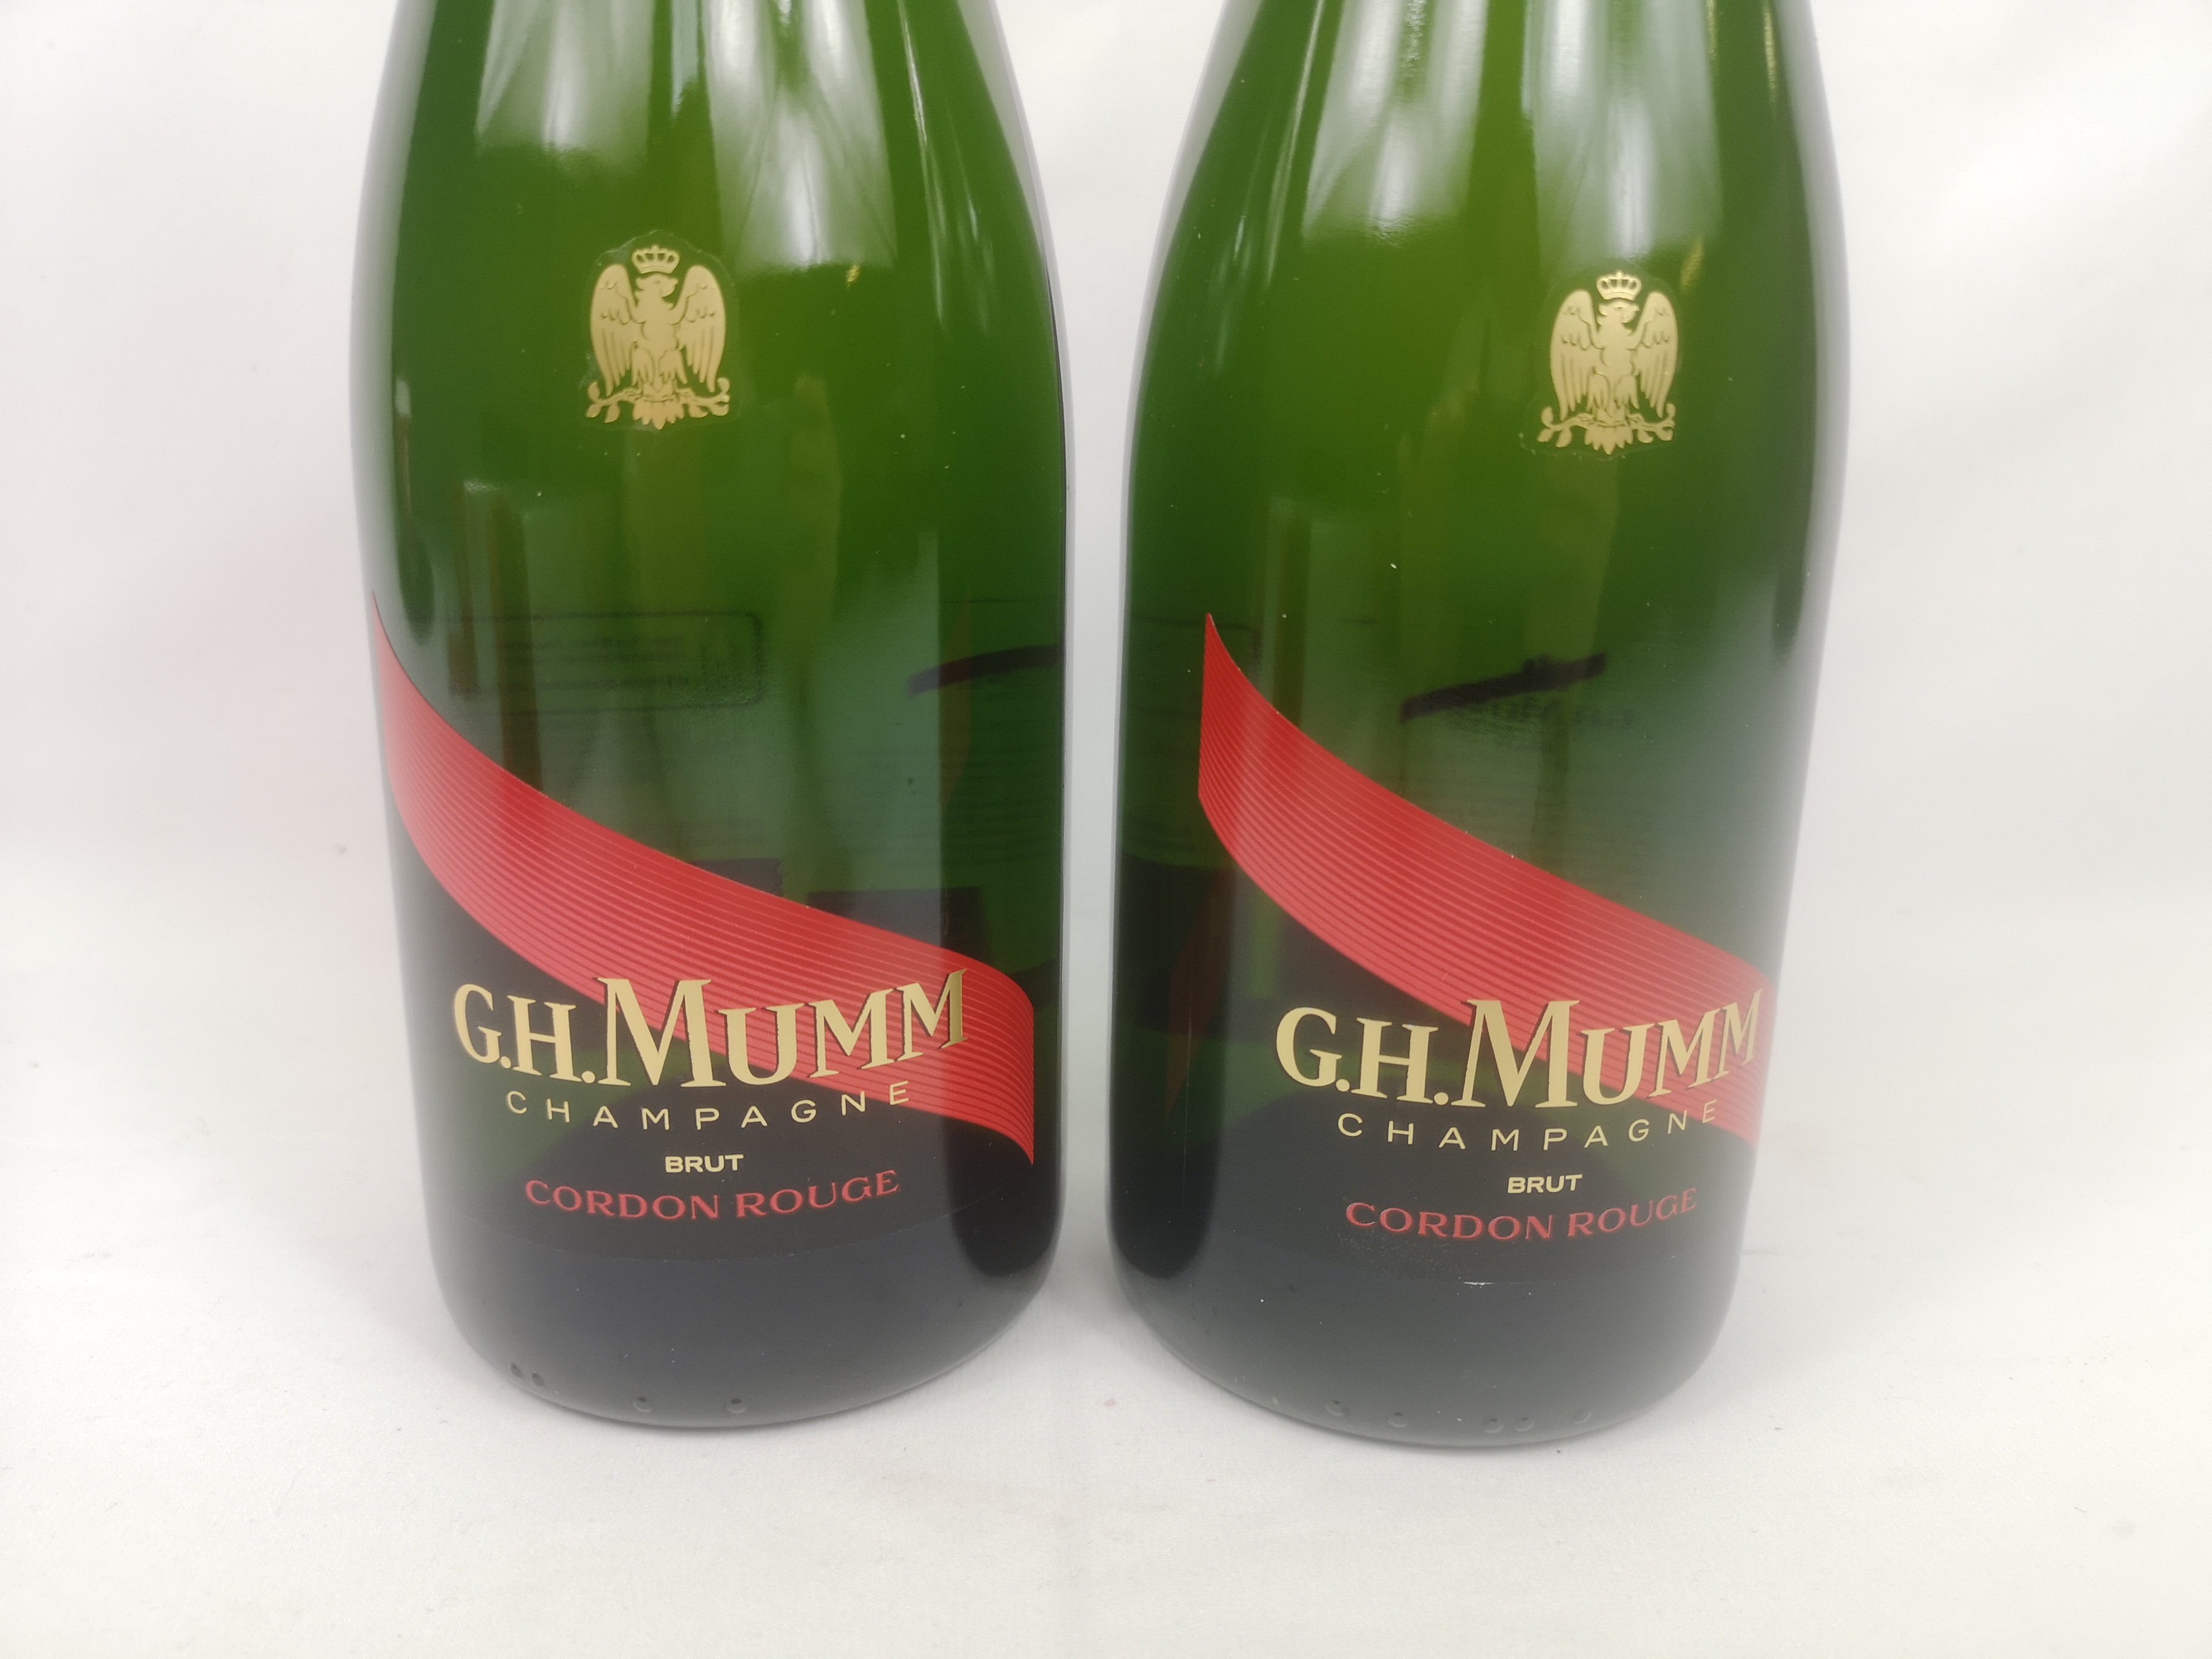 Two 75cl bottles of G.H. Mumm Brut Cordon Rouge champagne in boxes. - Image 3 of 5